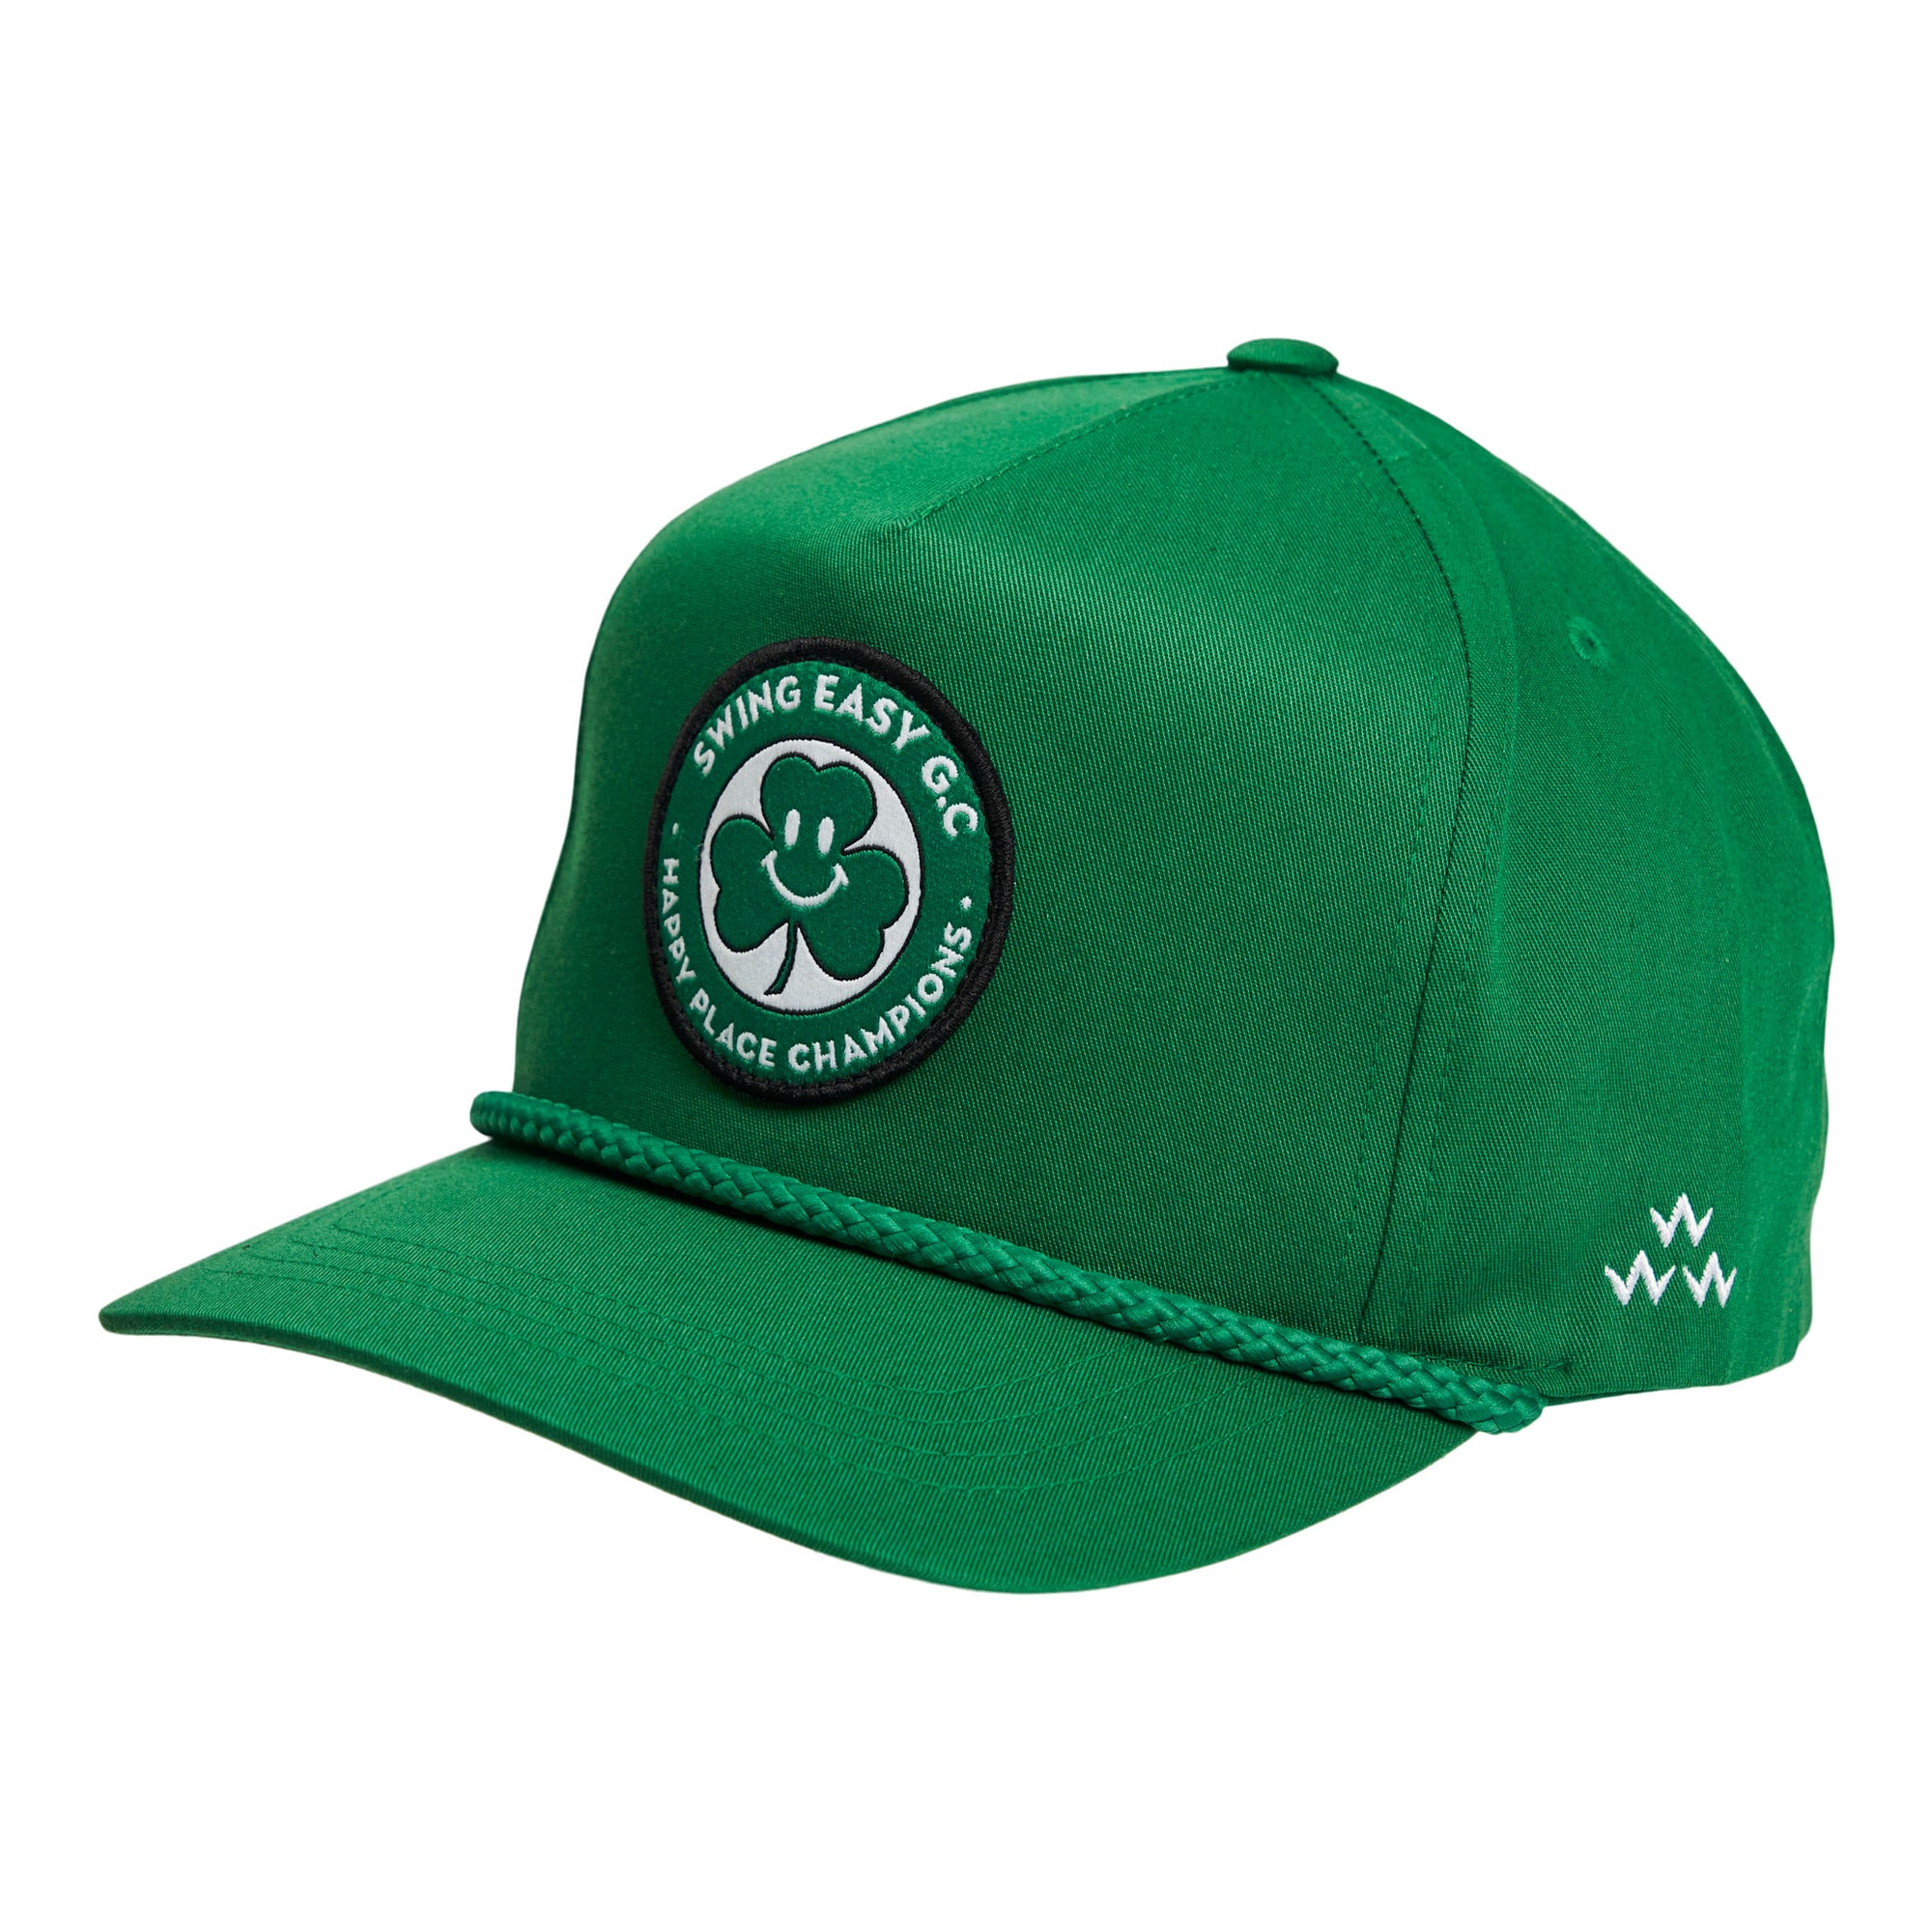 birds-of-condor-green-white-swing-easy-golf-club-happy-place-champions-fifa-world-cup-football-fly-condor-golf-snapback-hat-cap-front